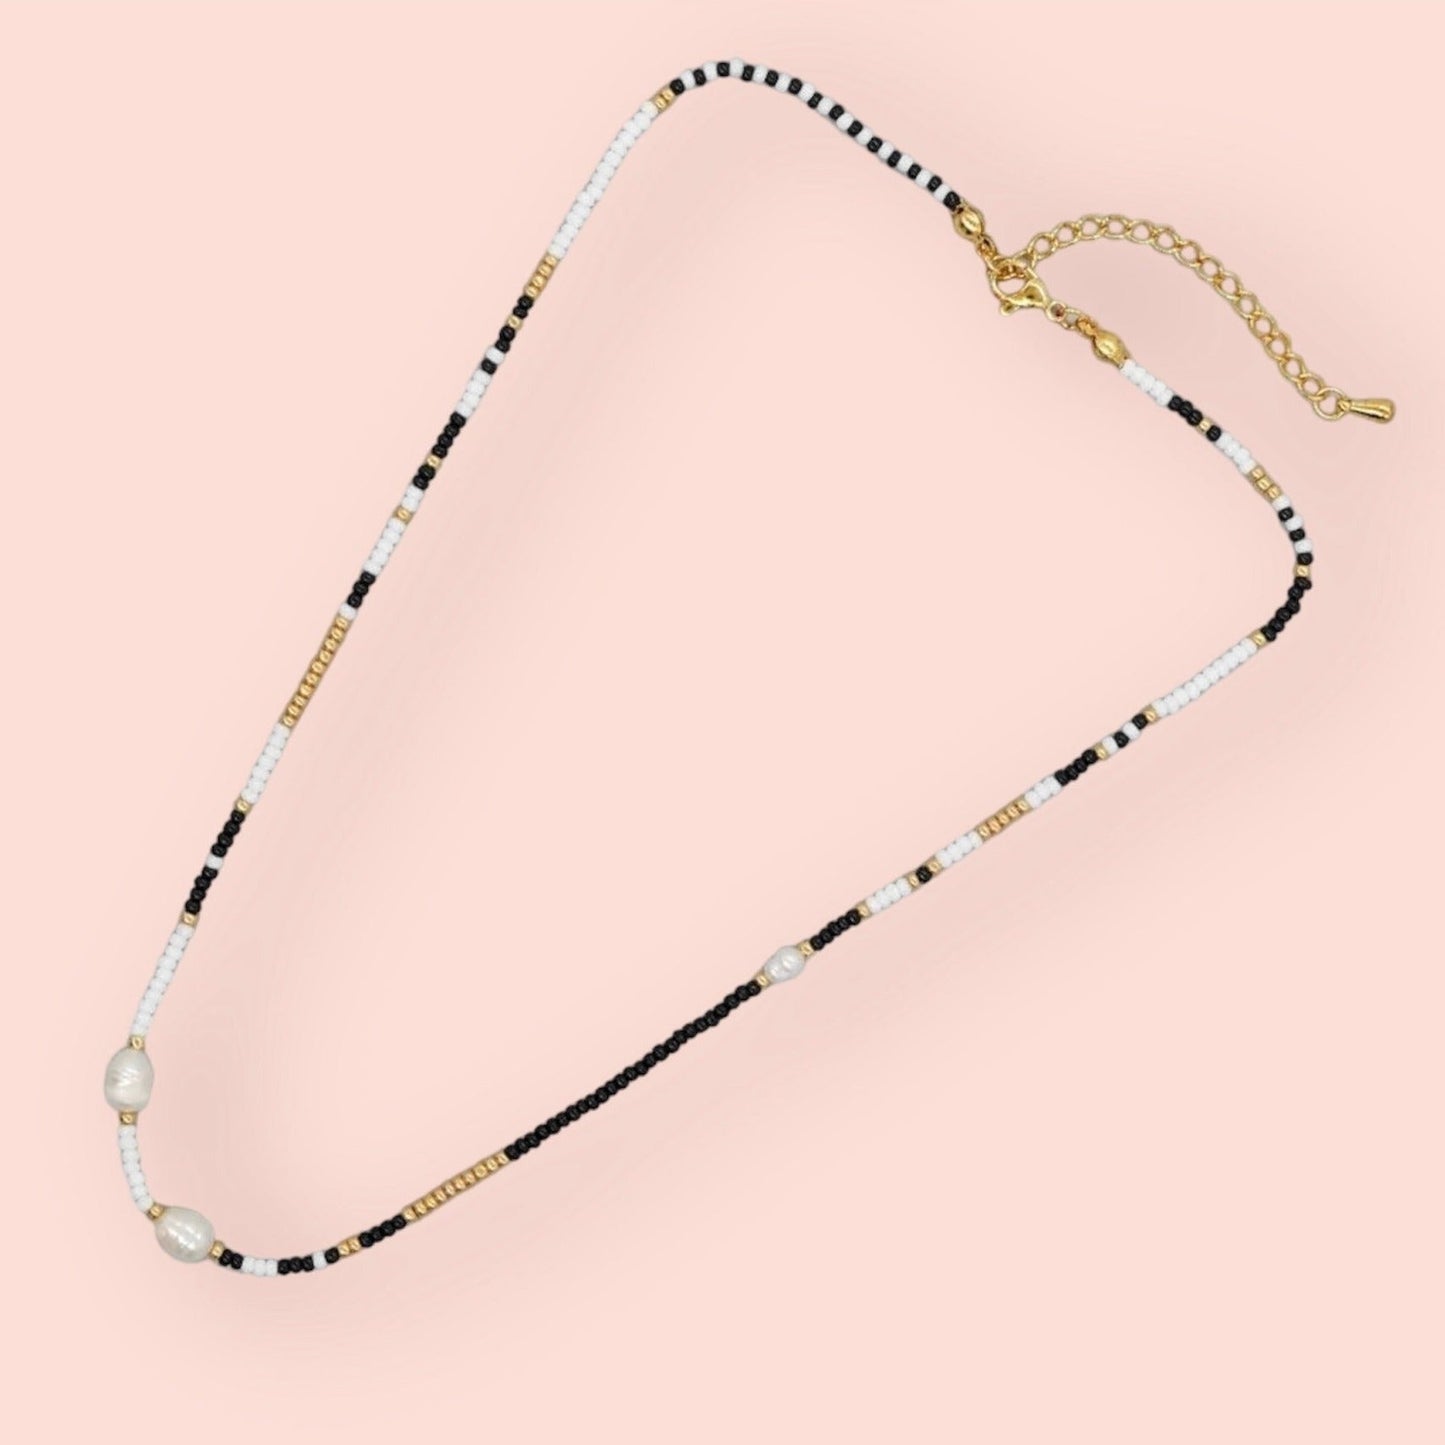 El Mariachi Beaded Black Gold and Pearl Necklace-